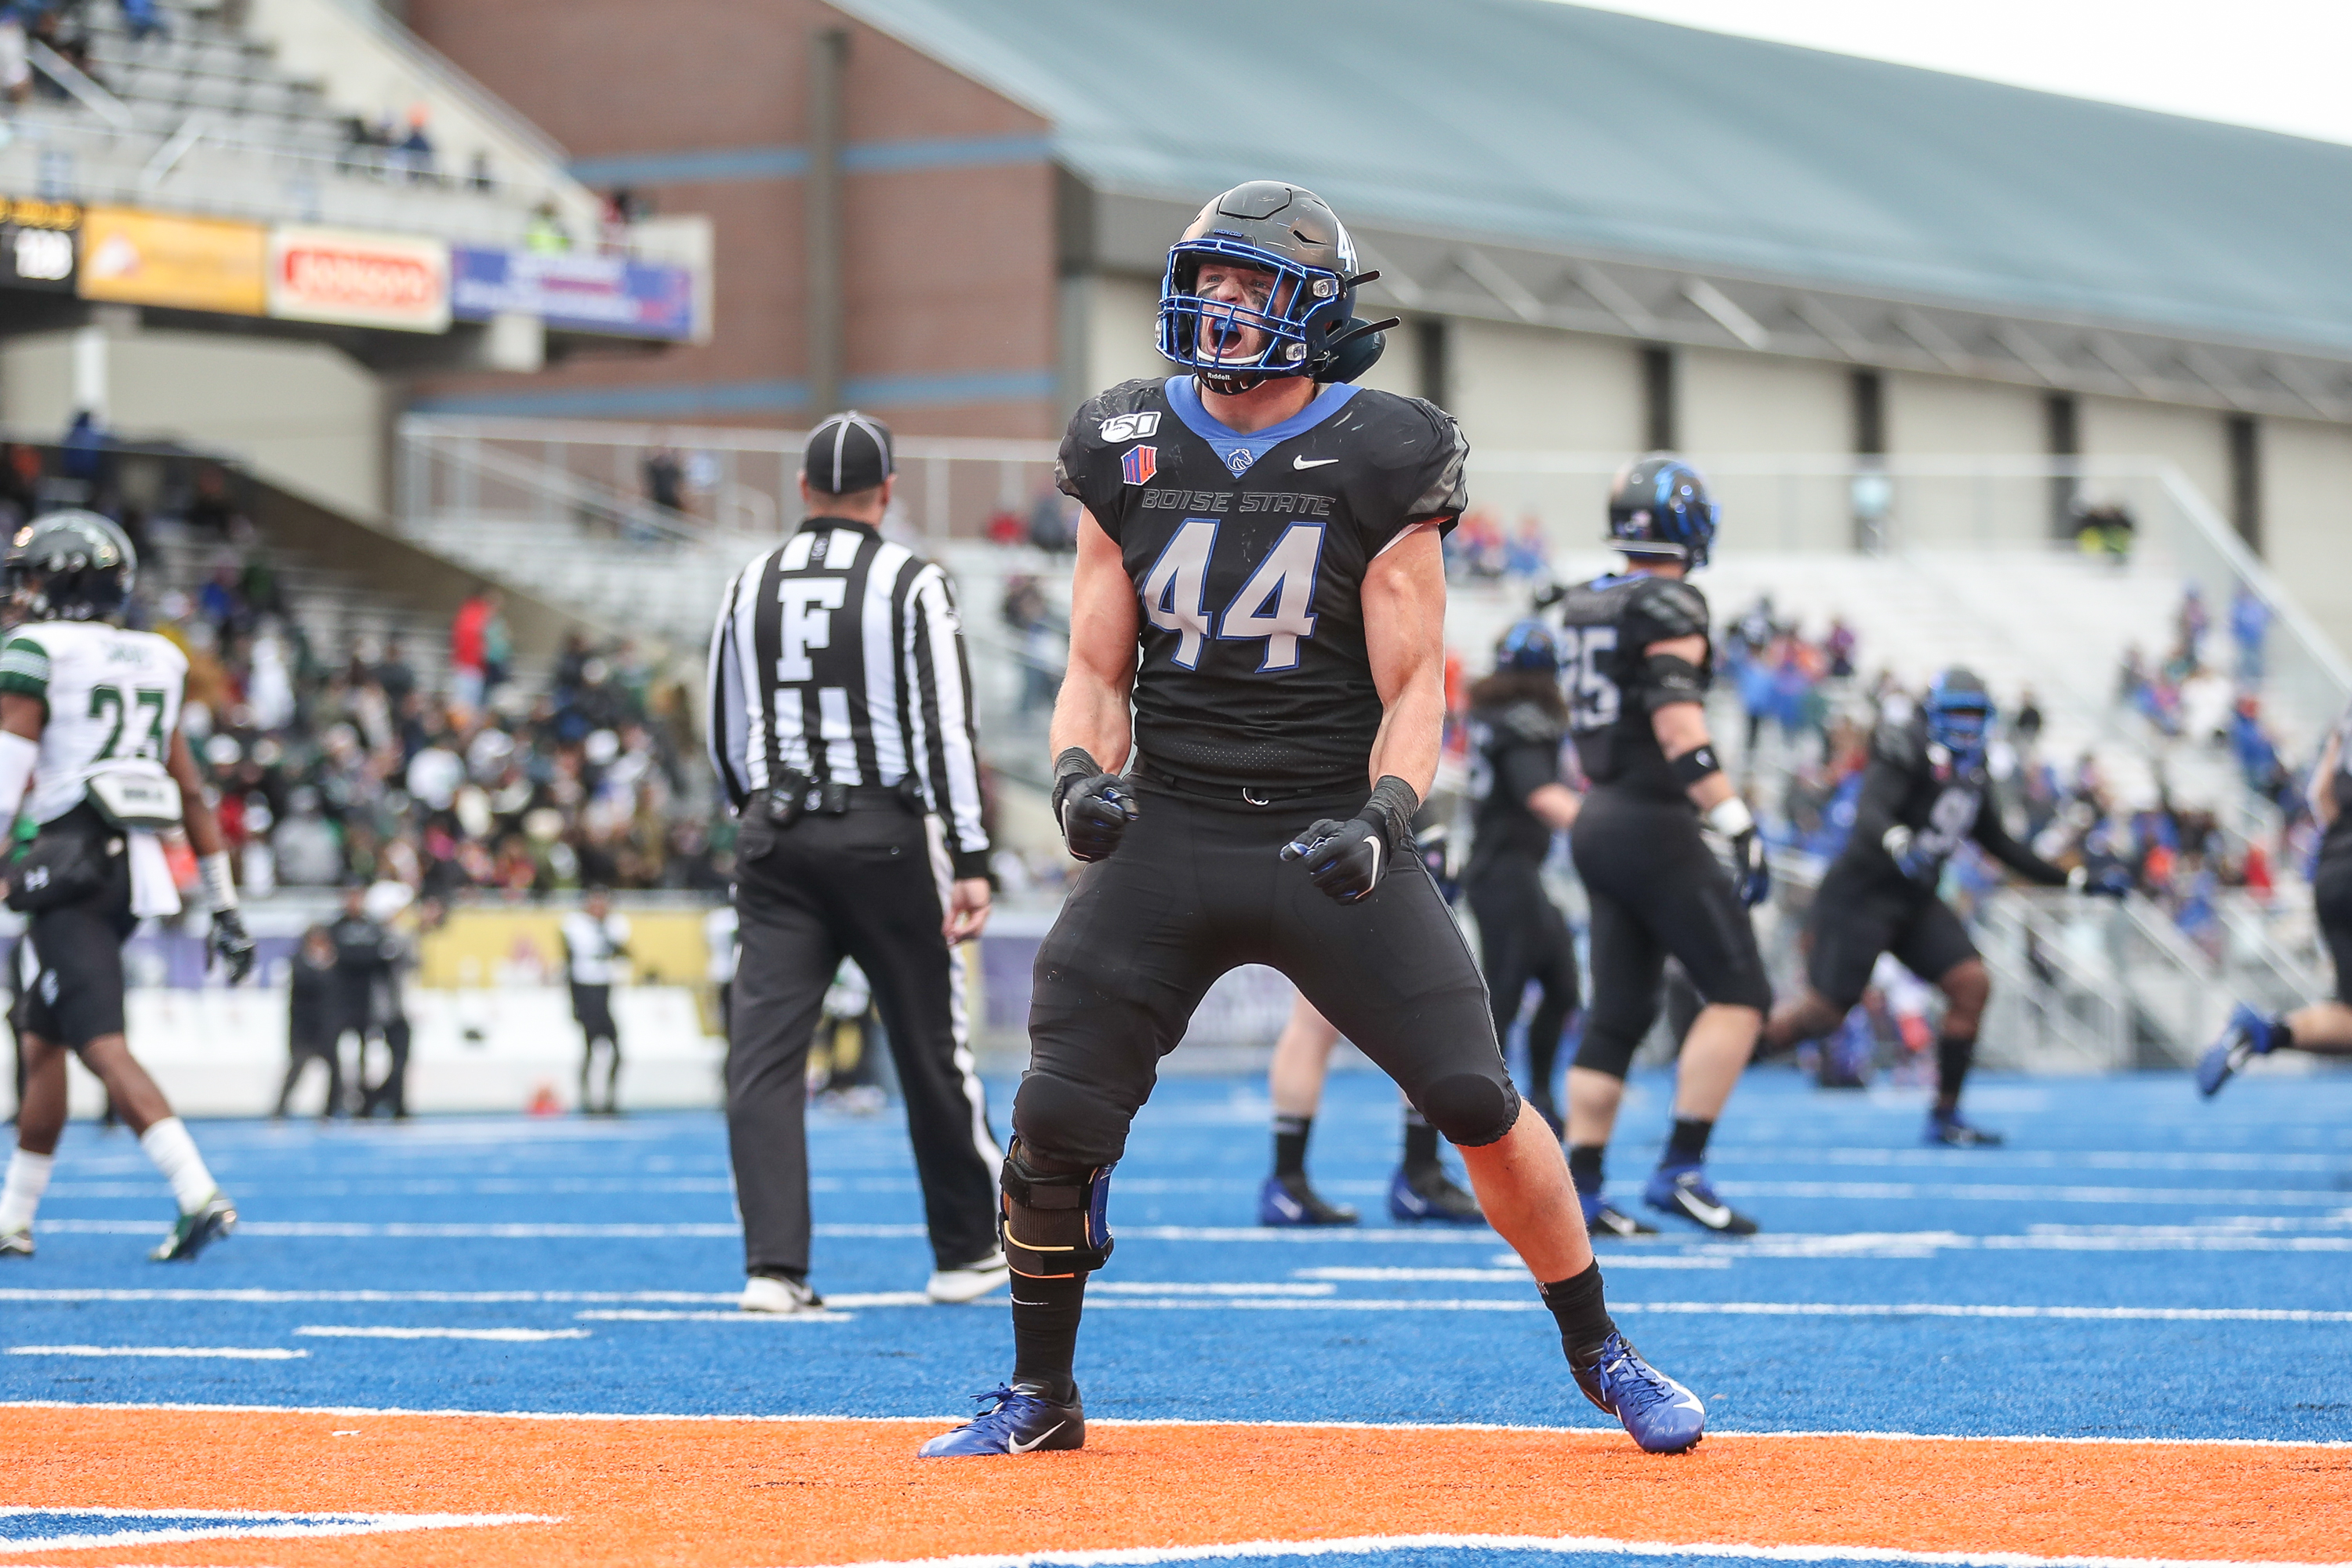 Mountain West Championship - Hawaii v Boise State